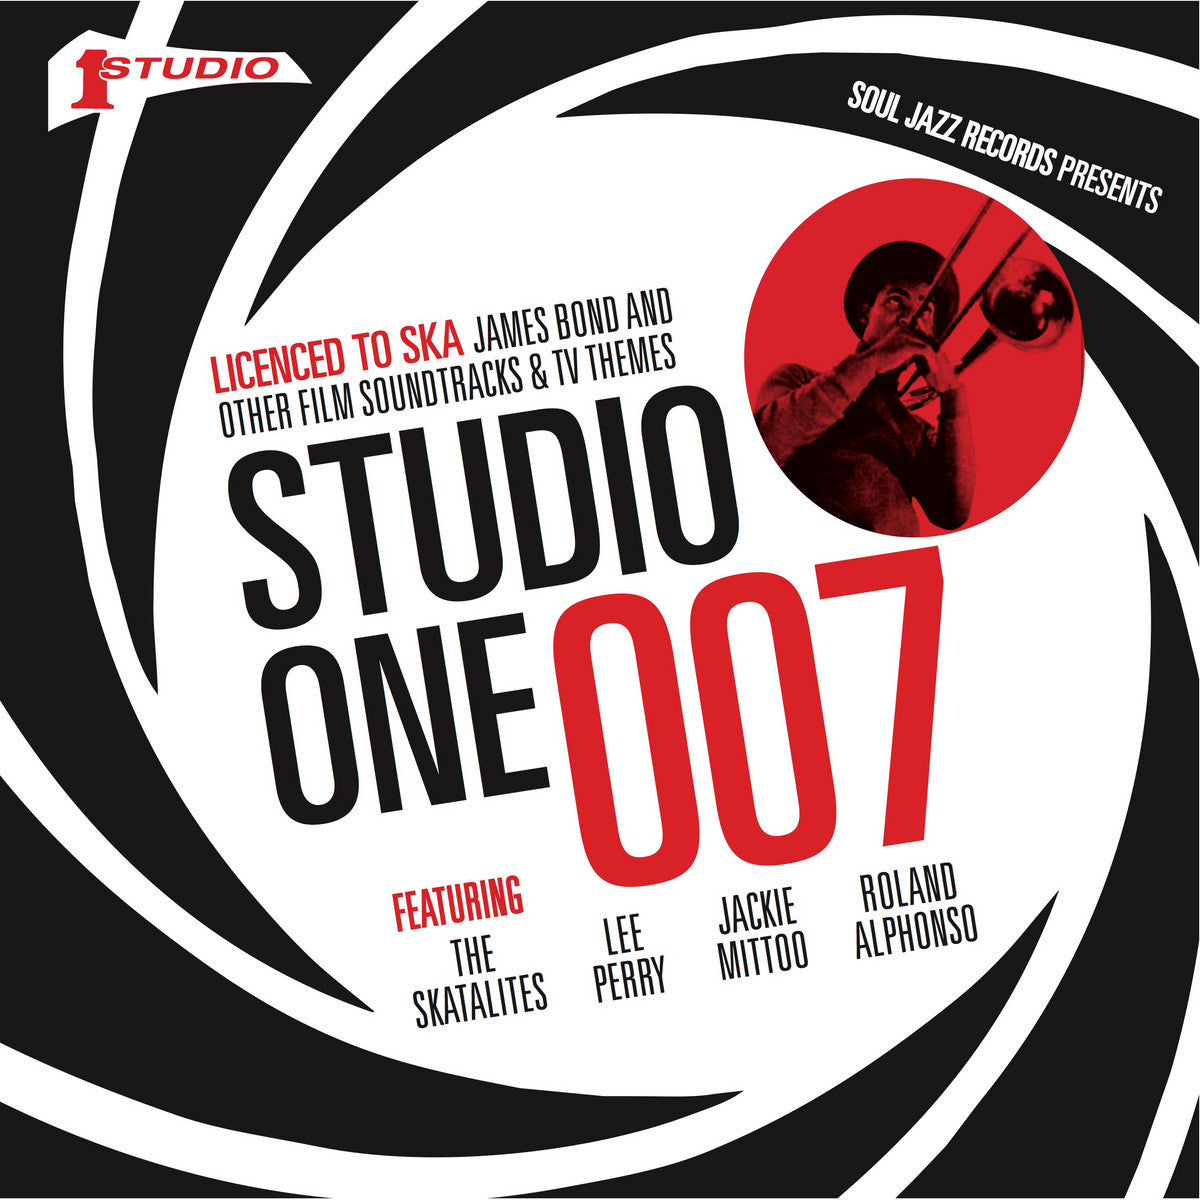 VARIOUS - Soul Jazz Records Presents Studio One 007, Licenced to Ska - 7"x5 Limited [RSD2020-AUG29] Edition Boxset